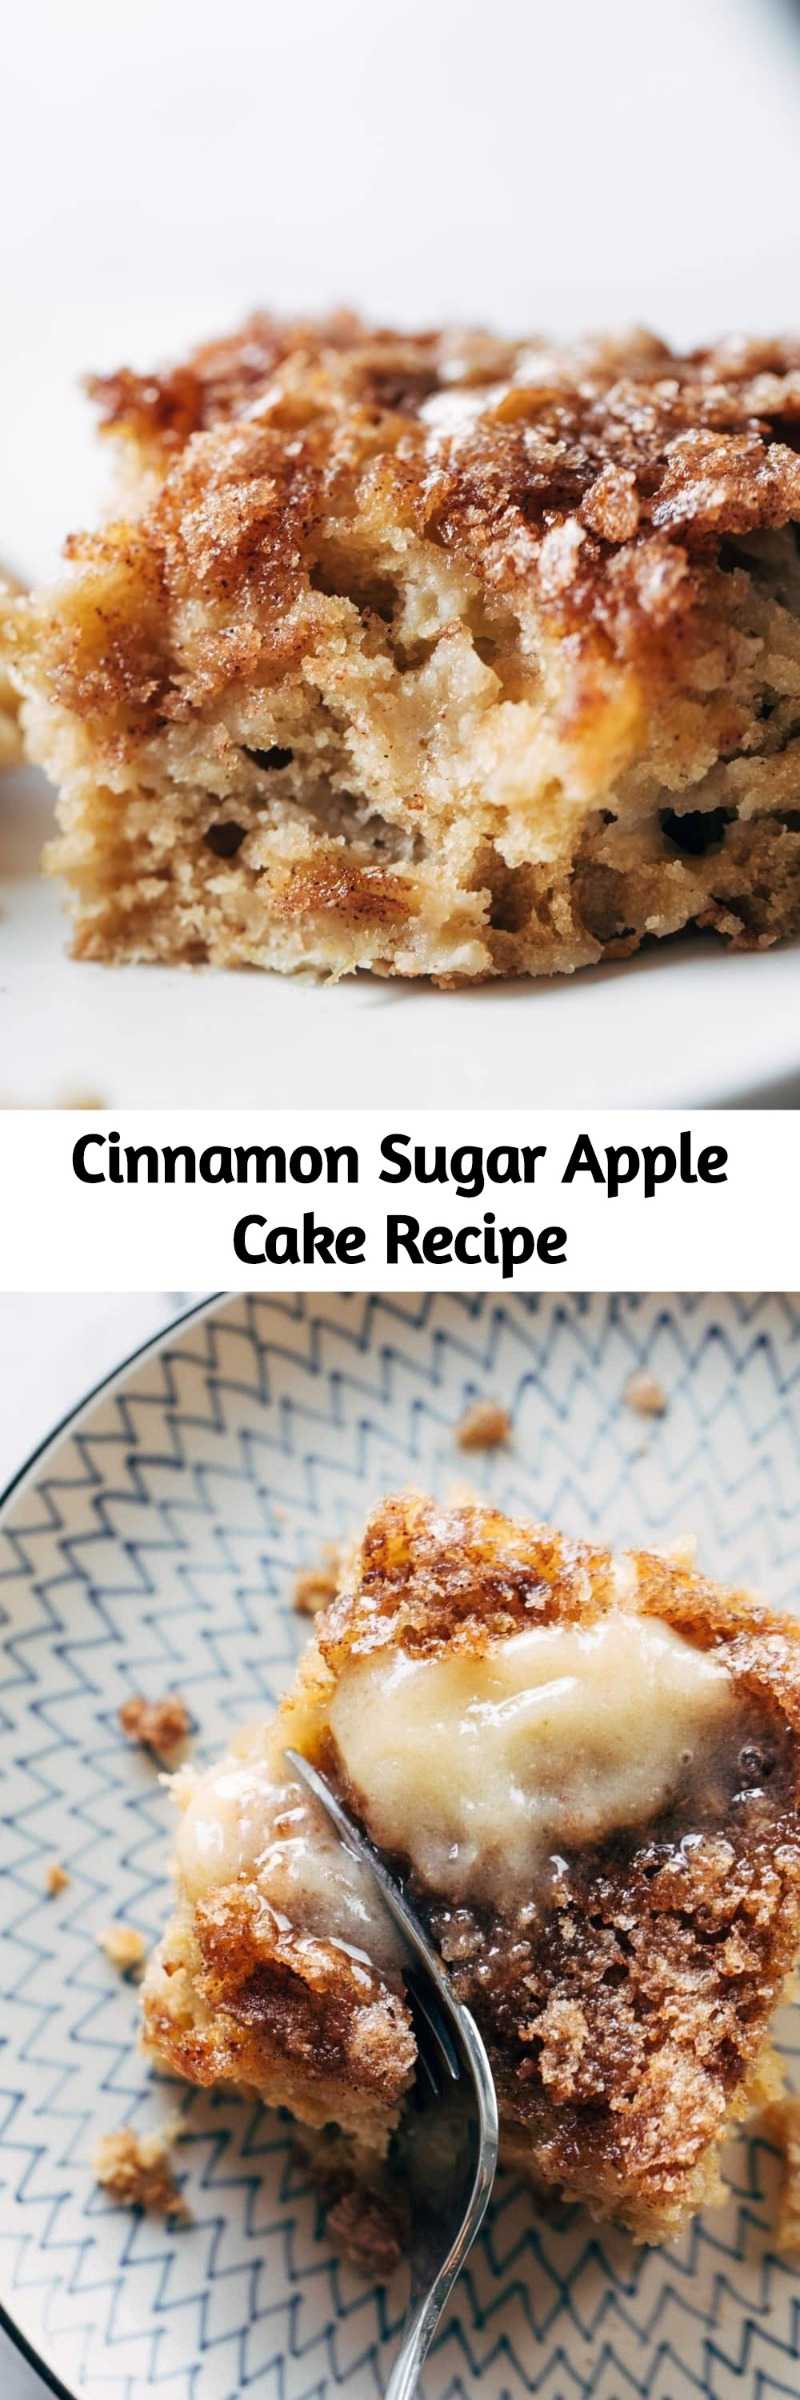 Cinnamon Sugar Apple Cake Recipe - This simple cinnamon sugar apple cake is light and fluffy, loaded with fresh apples, and topped with a crunchy cinnamon sugar layer! #cake #apple #dessert #baking #recipe